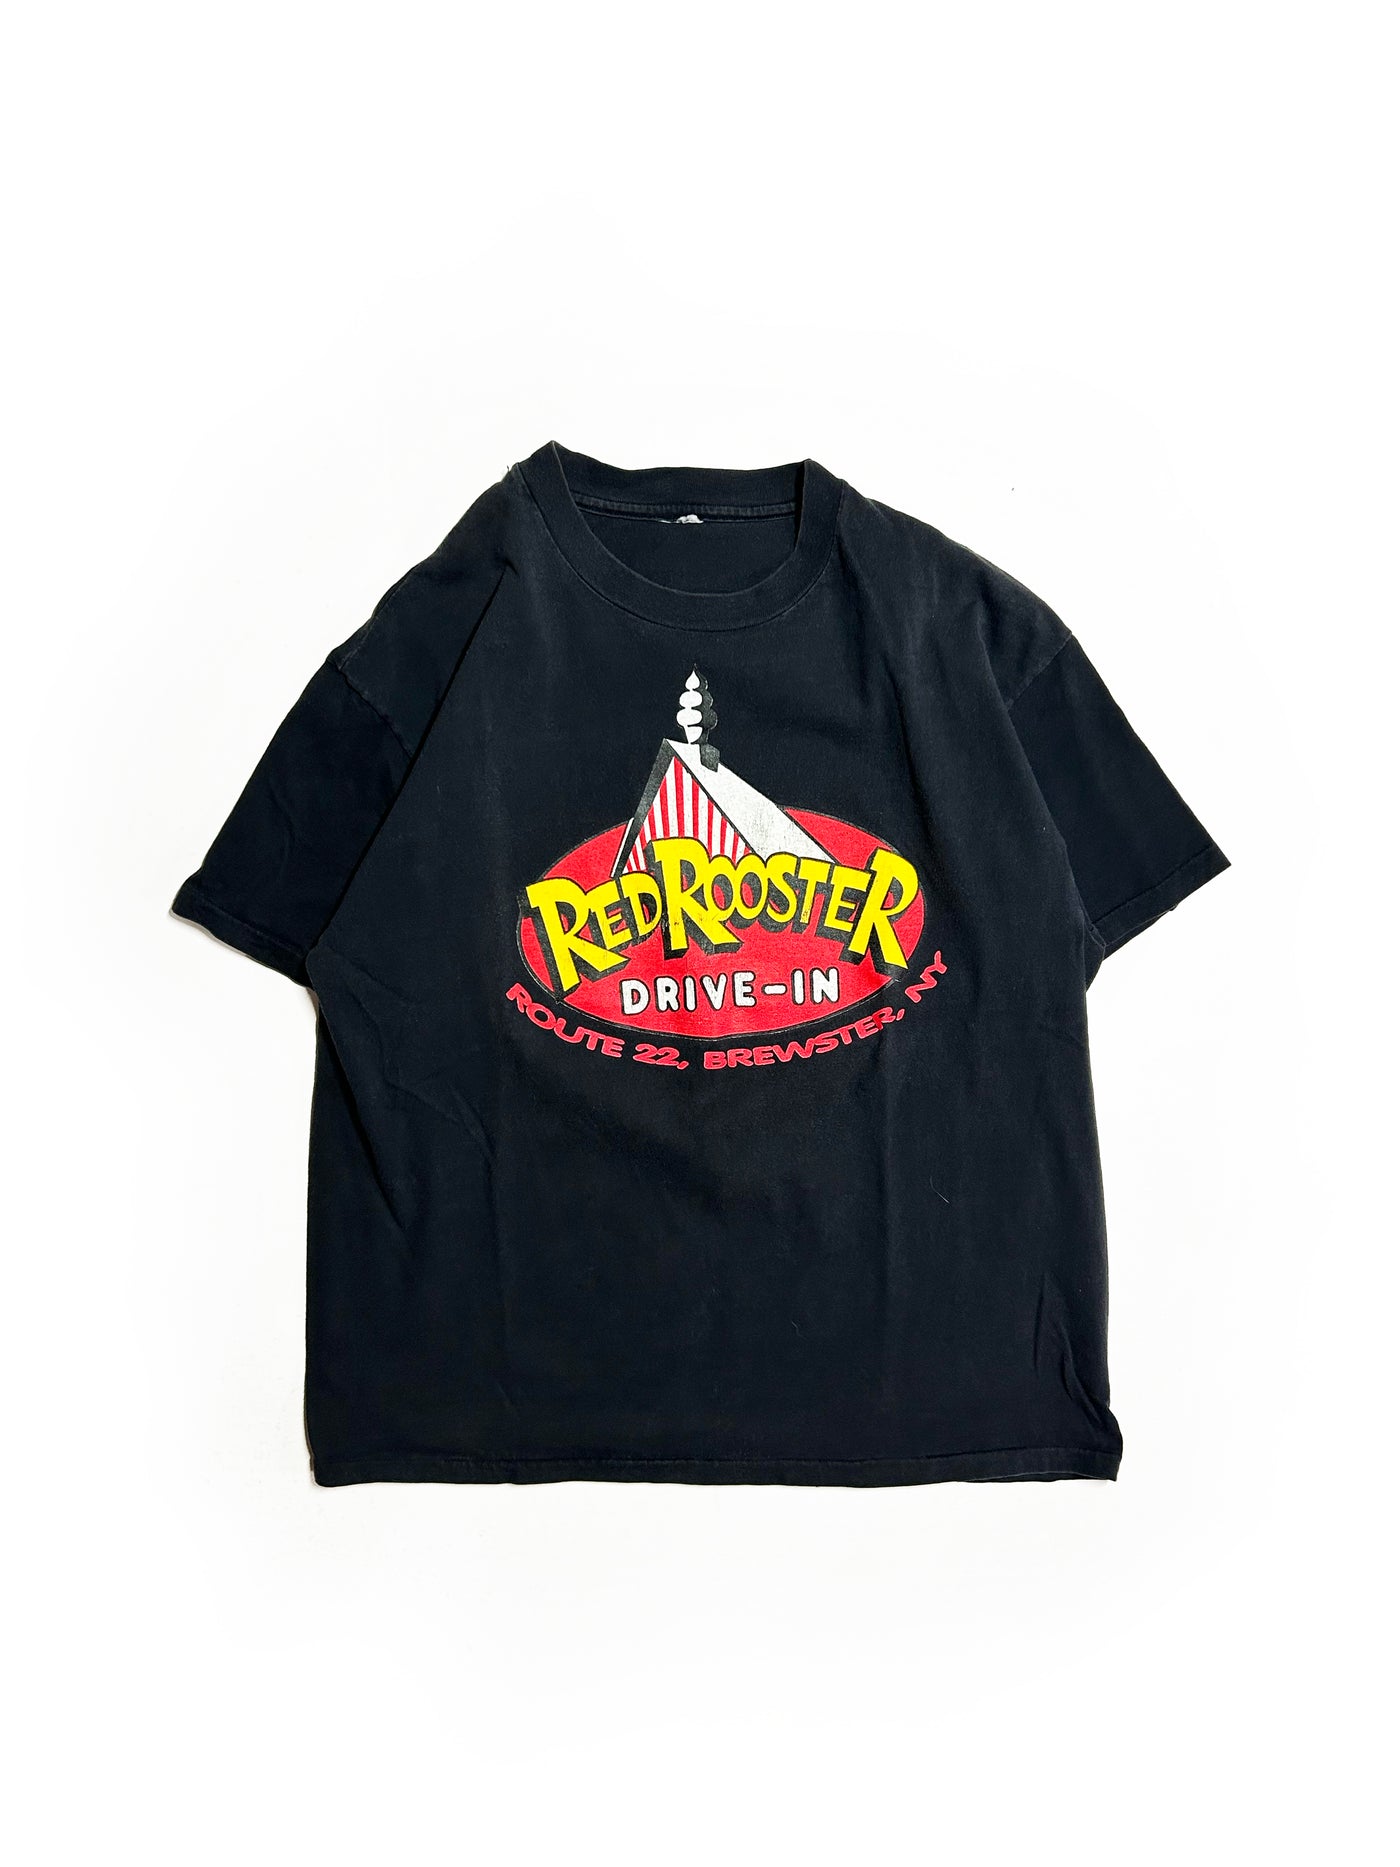 Vintage 90s Red Rooster Drive-In T-Shirt